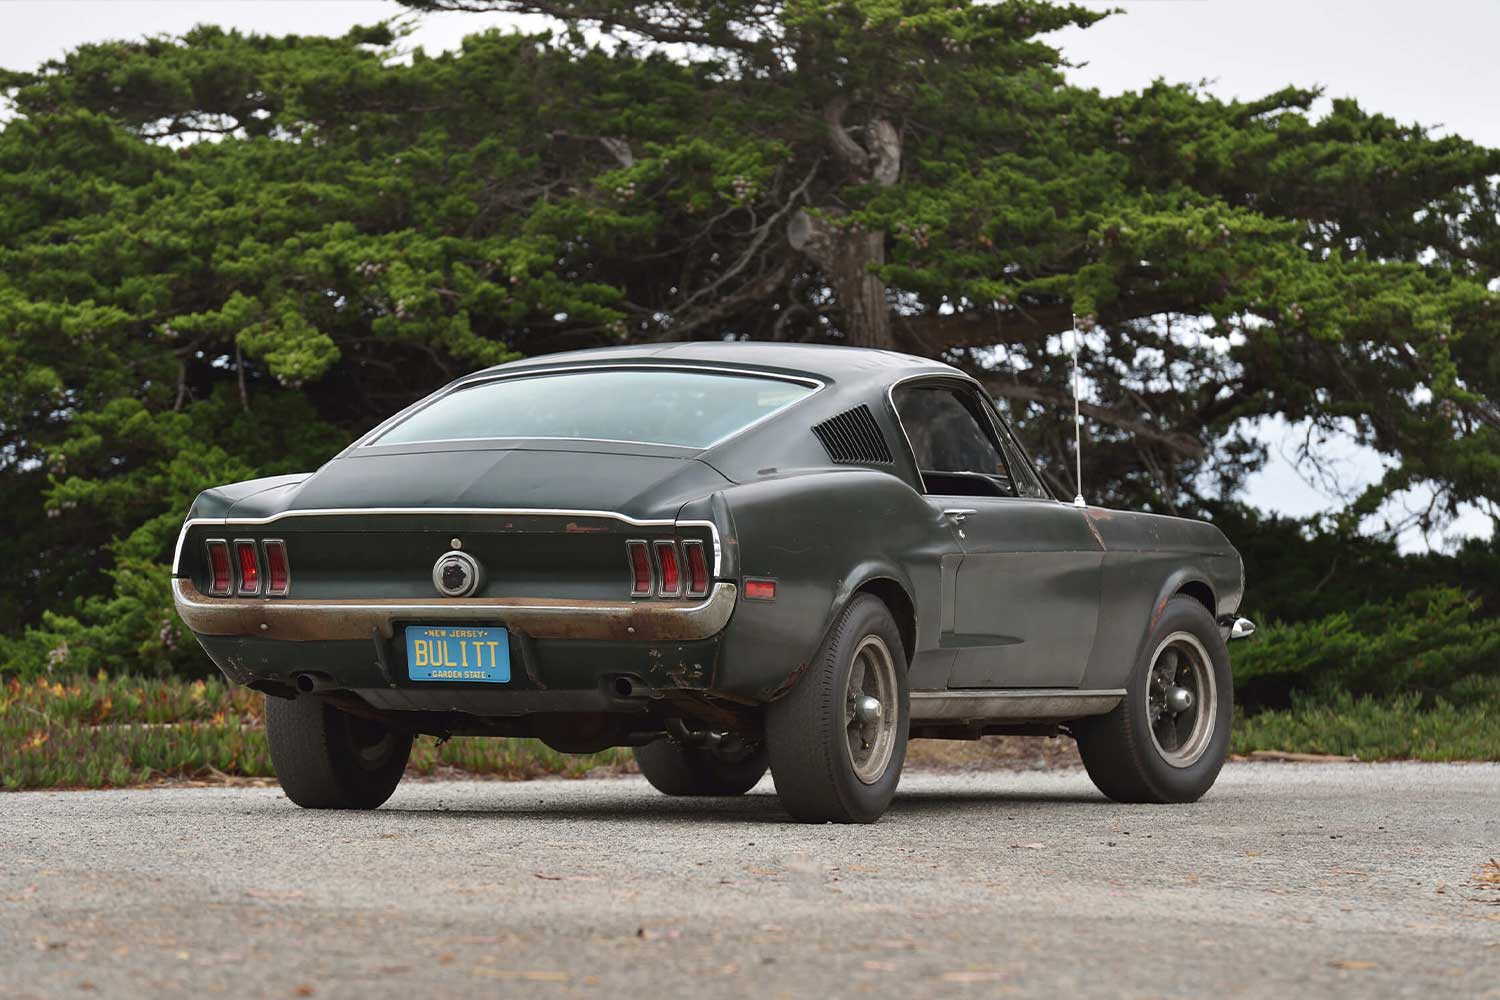 The McQueen Bullitt Mustang GT 390 Fastback was sold for $3,740,000 at Mecum Kissimmee 2020 and became the most valuable Ford Mustang in the world (Image: bullitt.mecum.com)